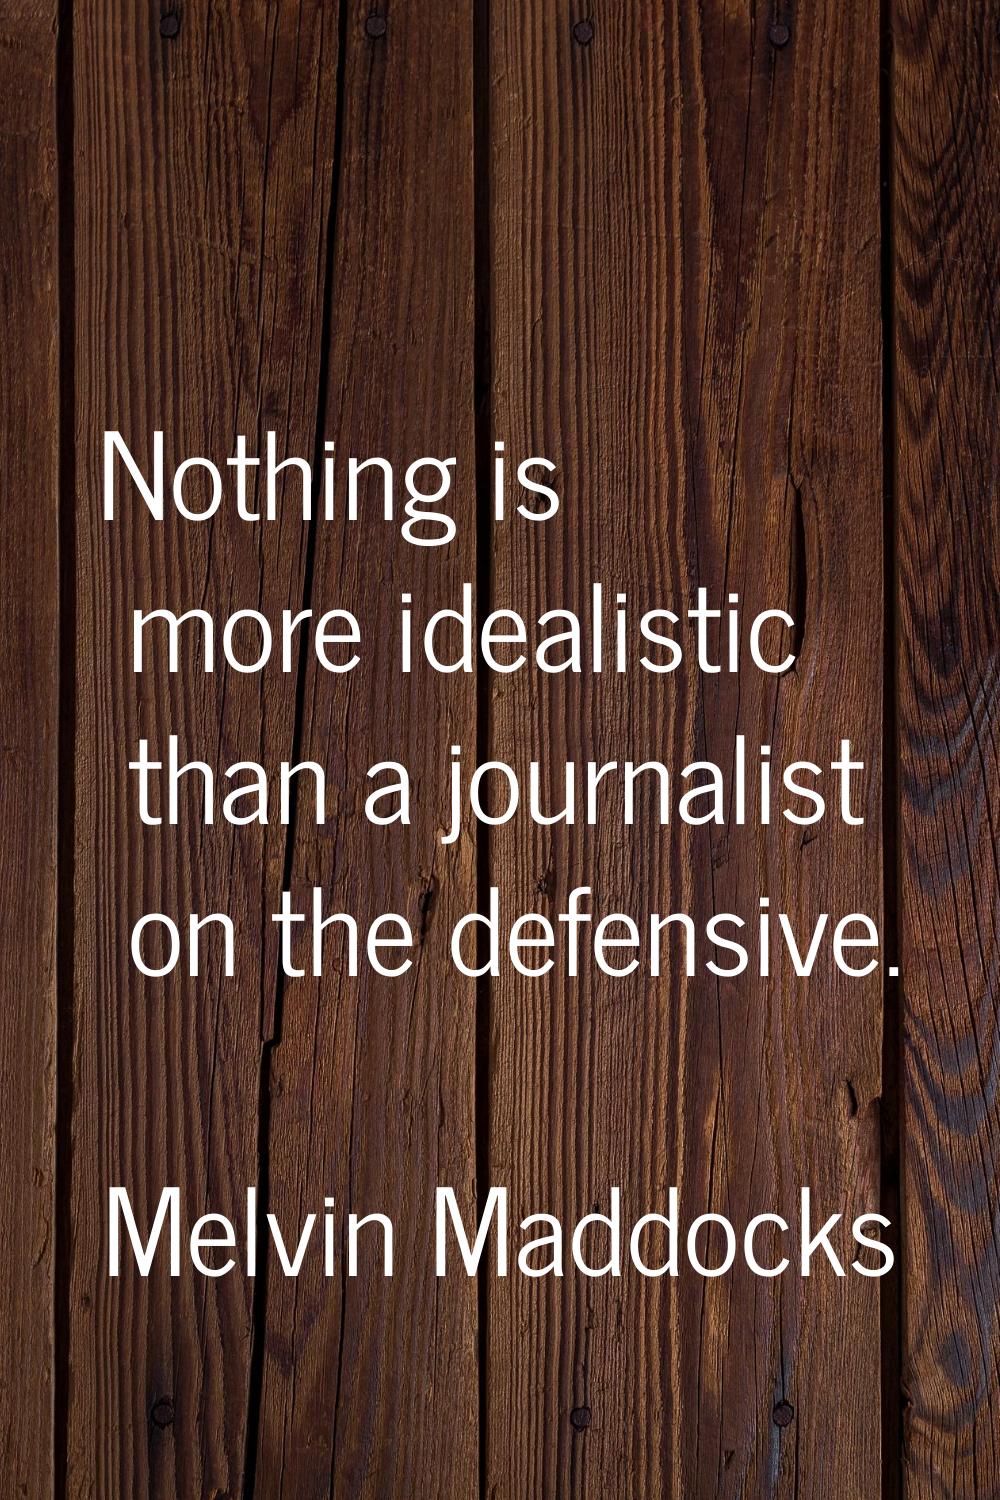 Nothing is more idealistic than a journalist on the defensive.